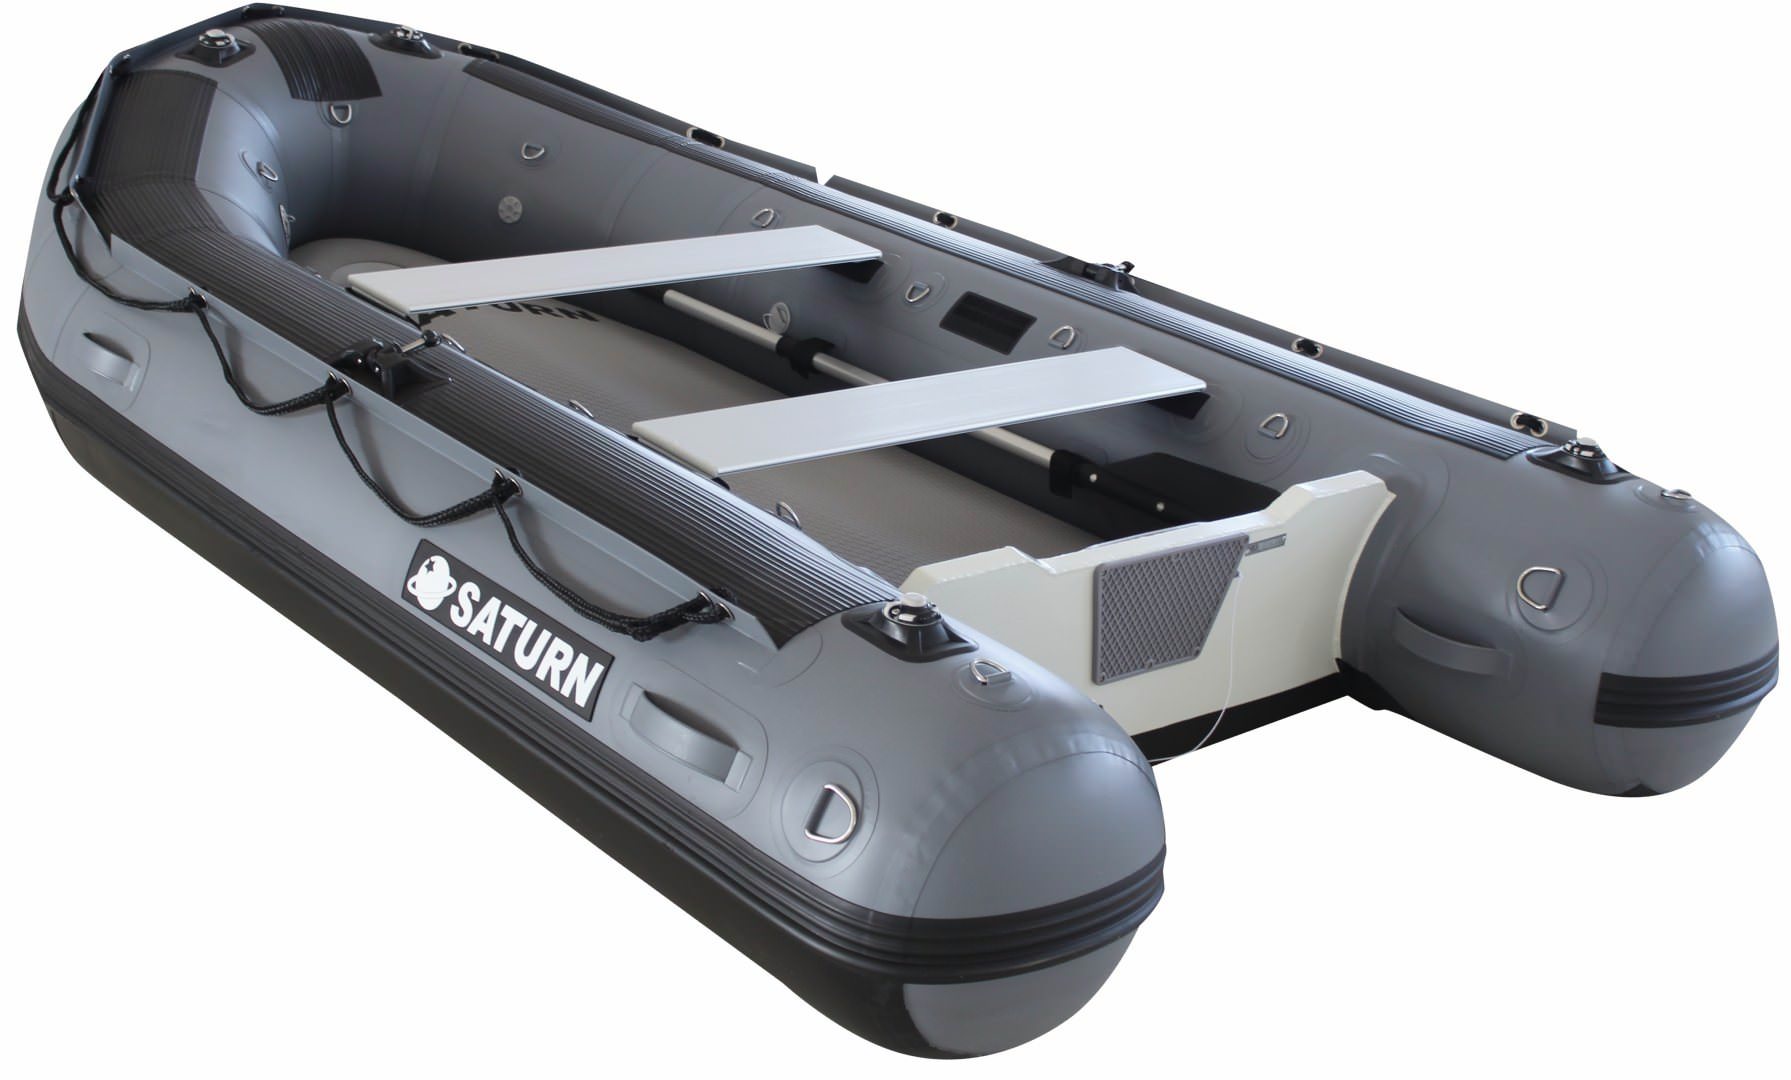 11' Saturn Heavy-Duty Fishing and Work Inflatable Boats with Aluminum  Transom.